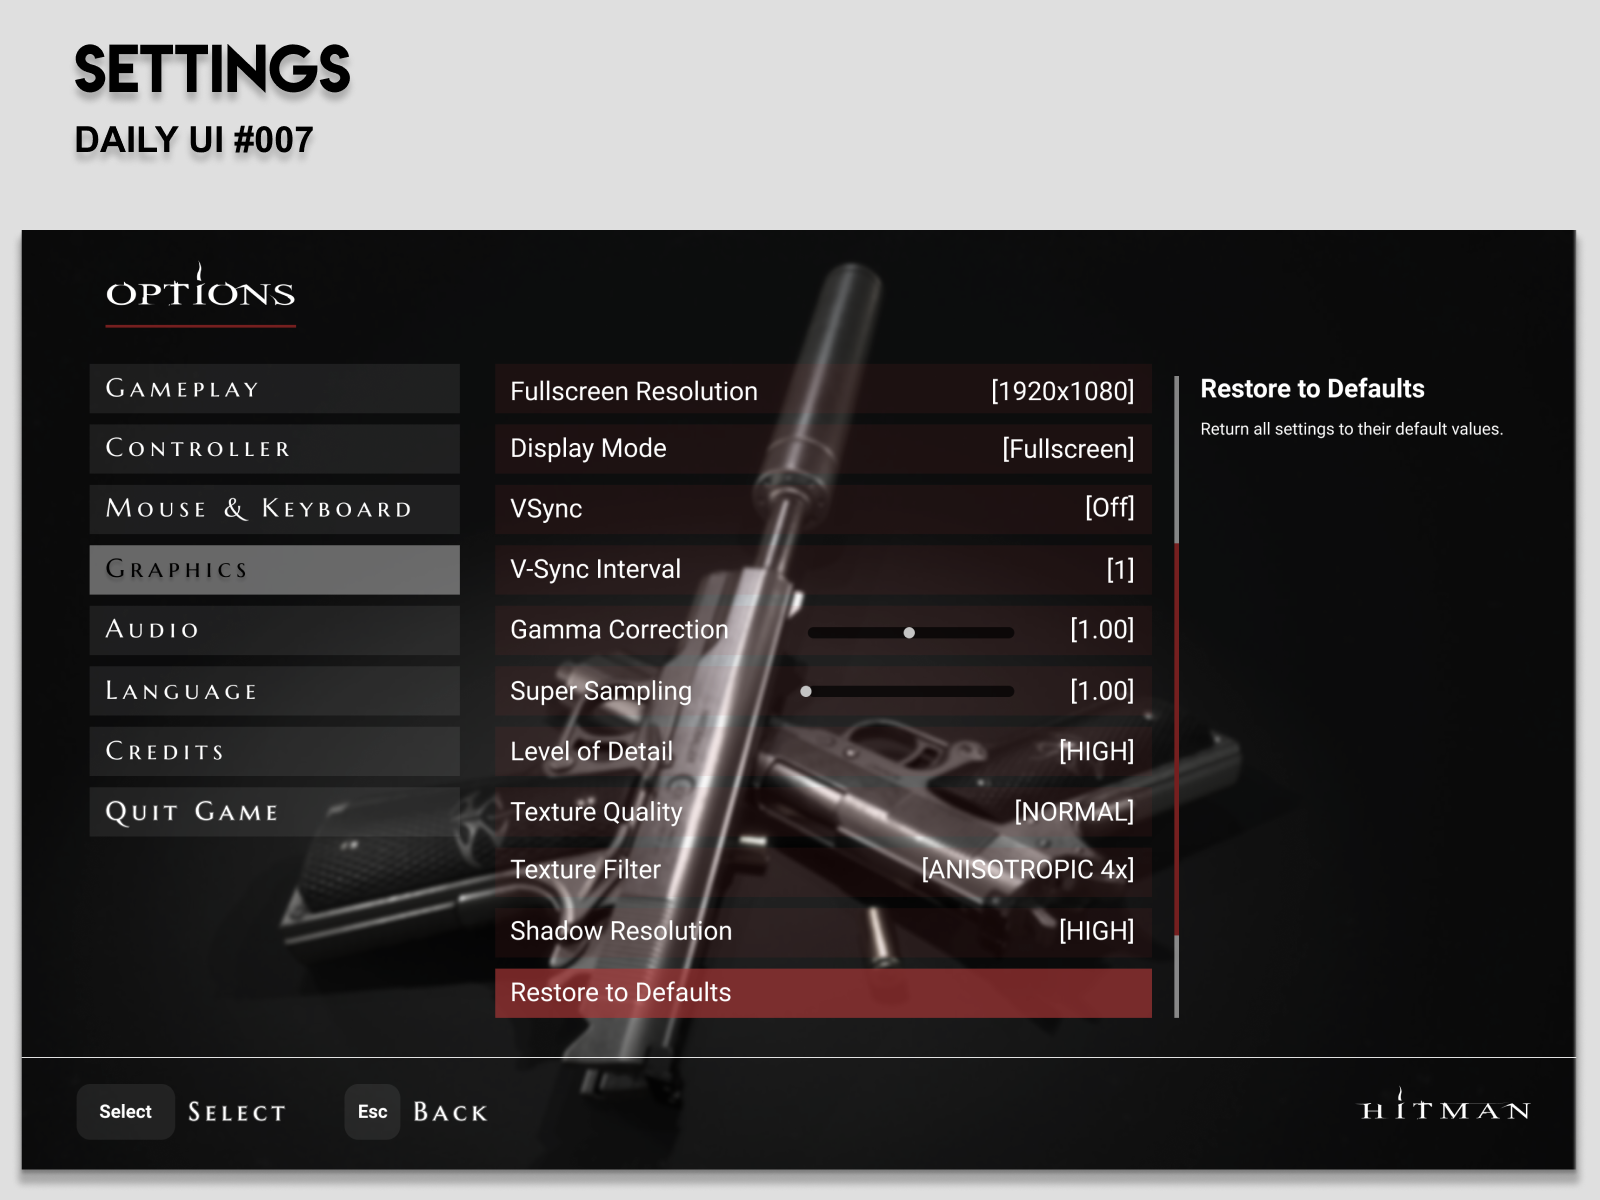 Settings menu for game by Rengised on Dribbble